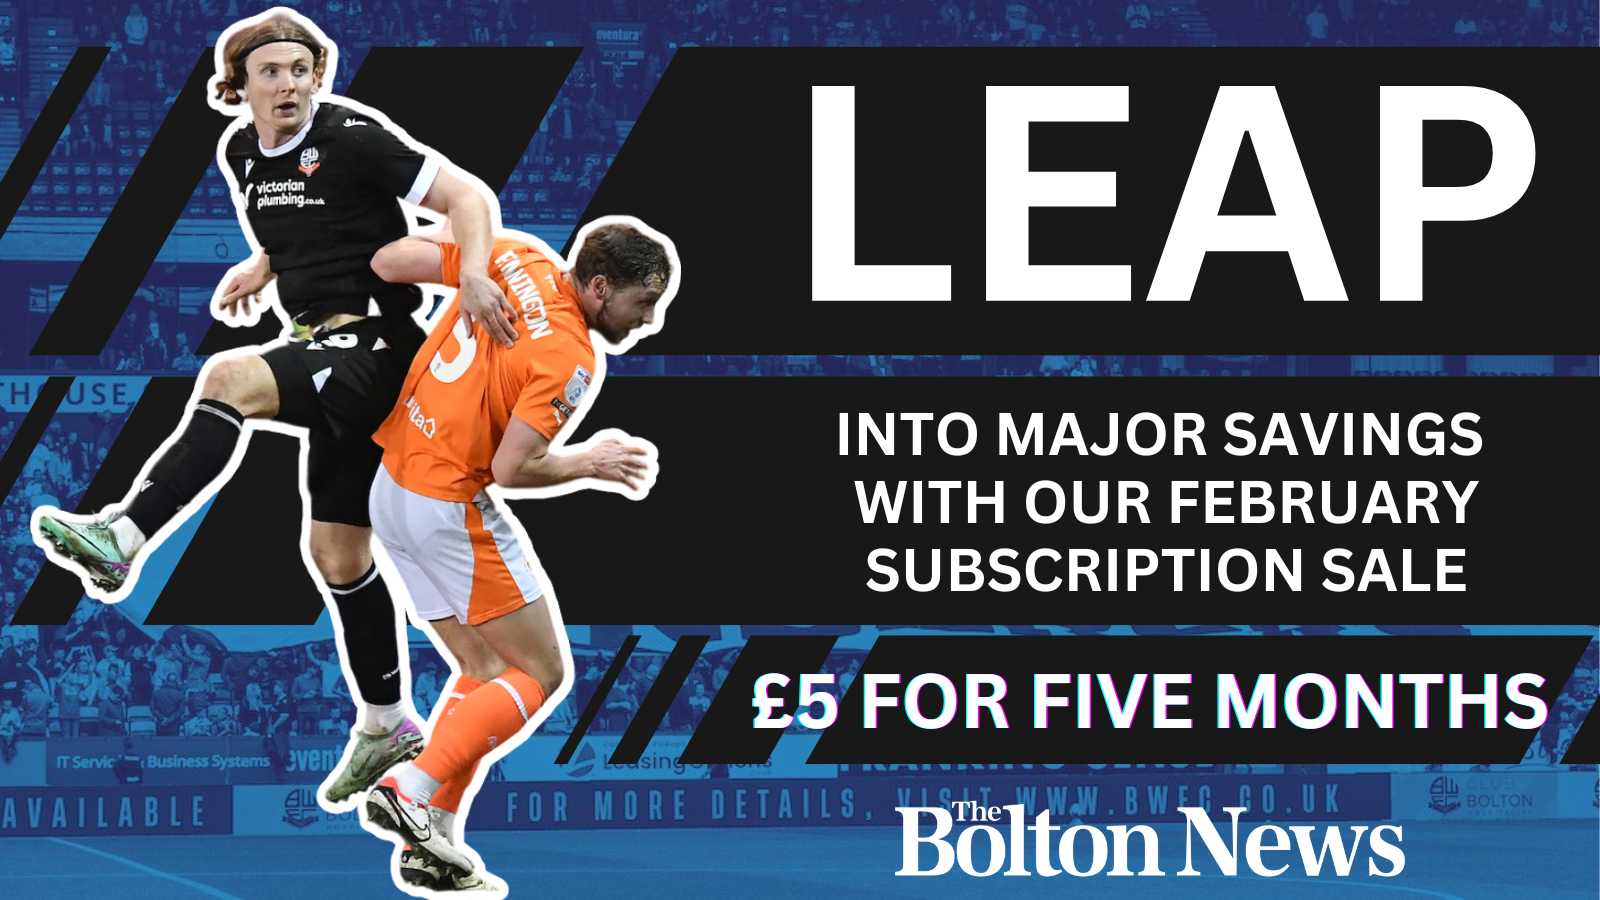 Bolton Wanderers - don't miss a thing in the promotion push!